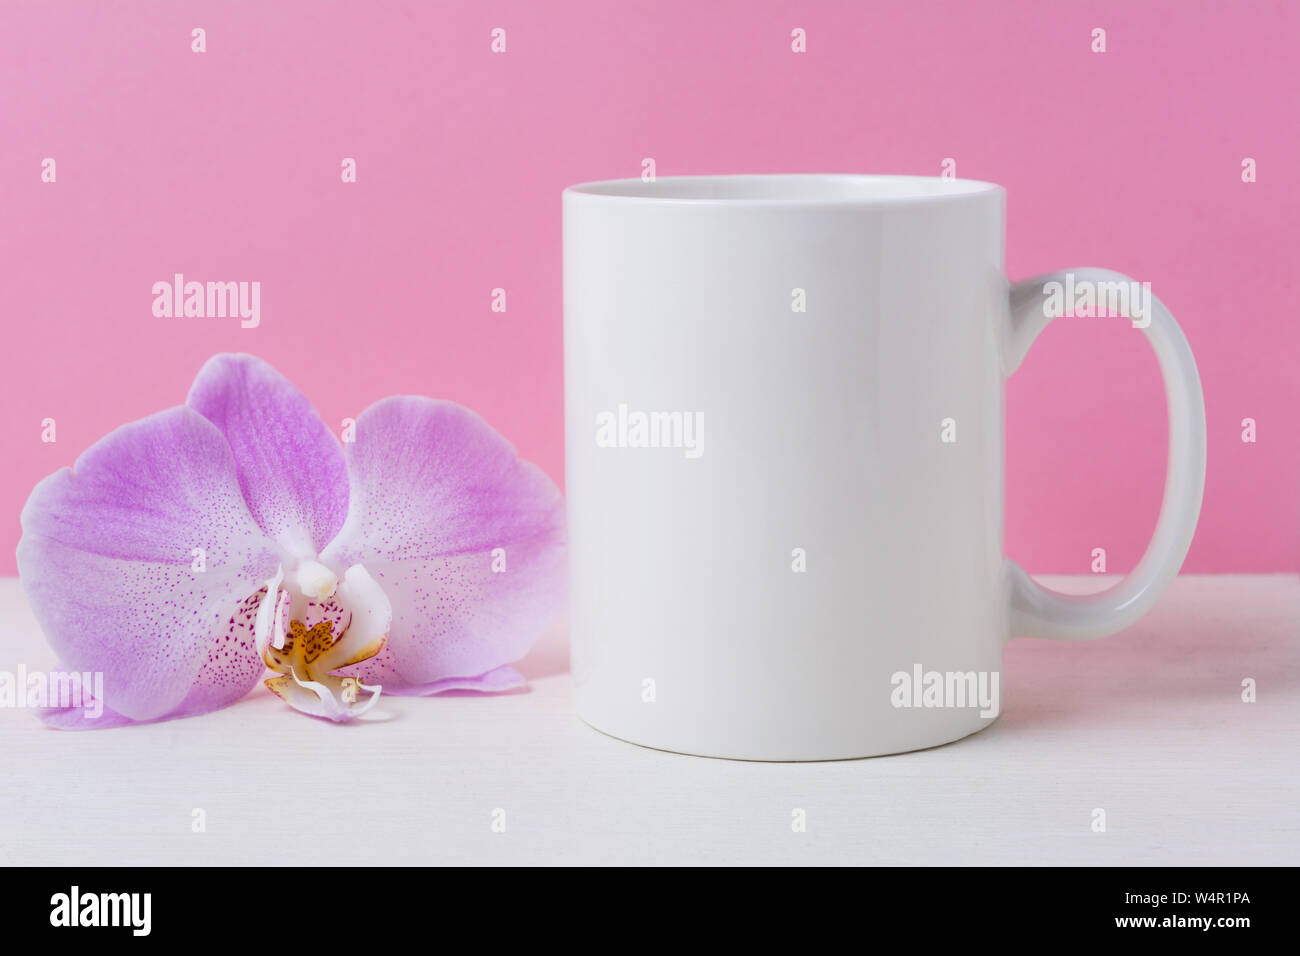 White coffee mug mockup on the pink background with purple orchid. Empty mug mock up for design promotion. Stock Photo